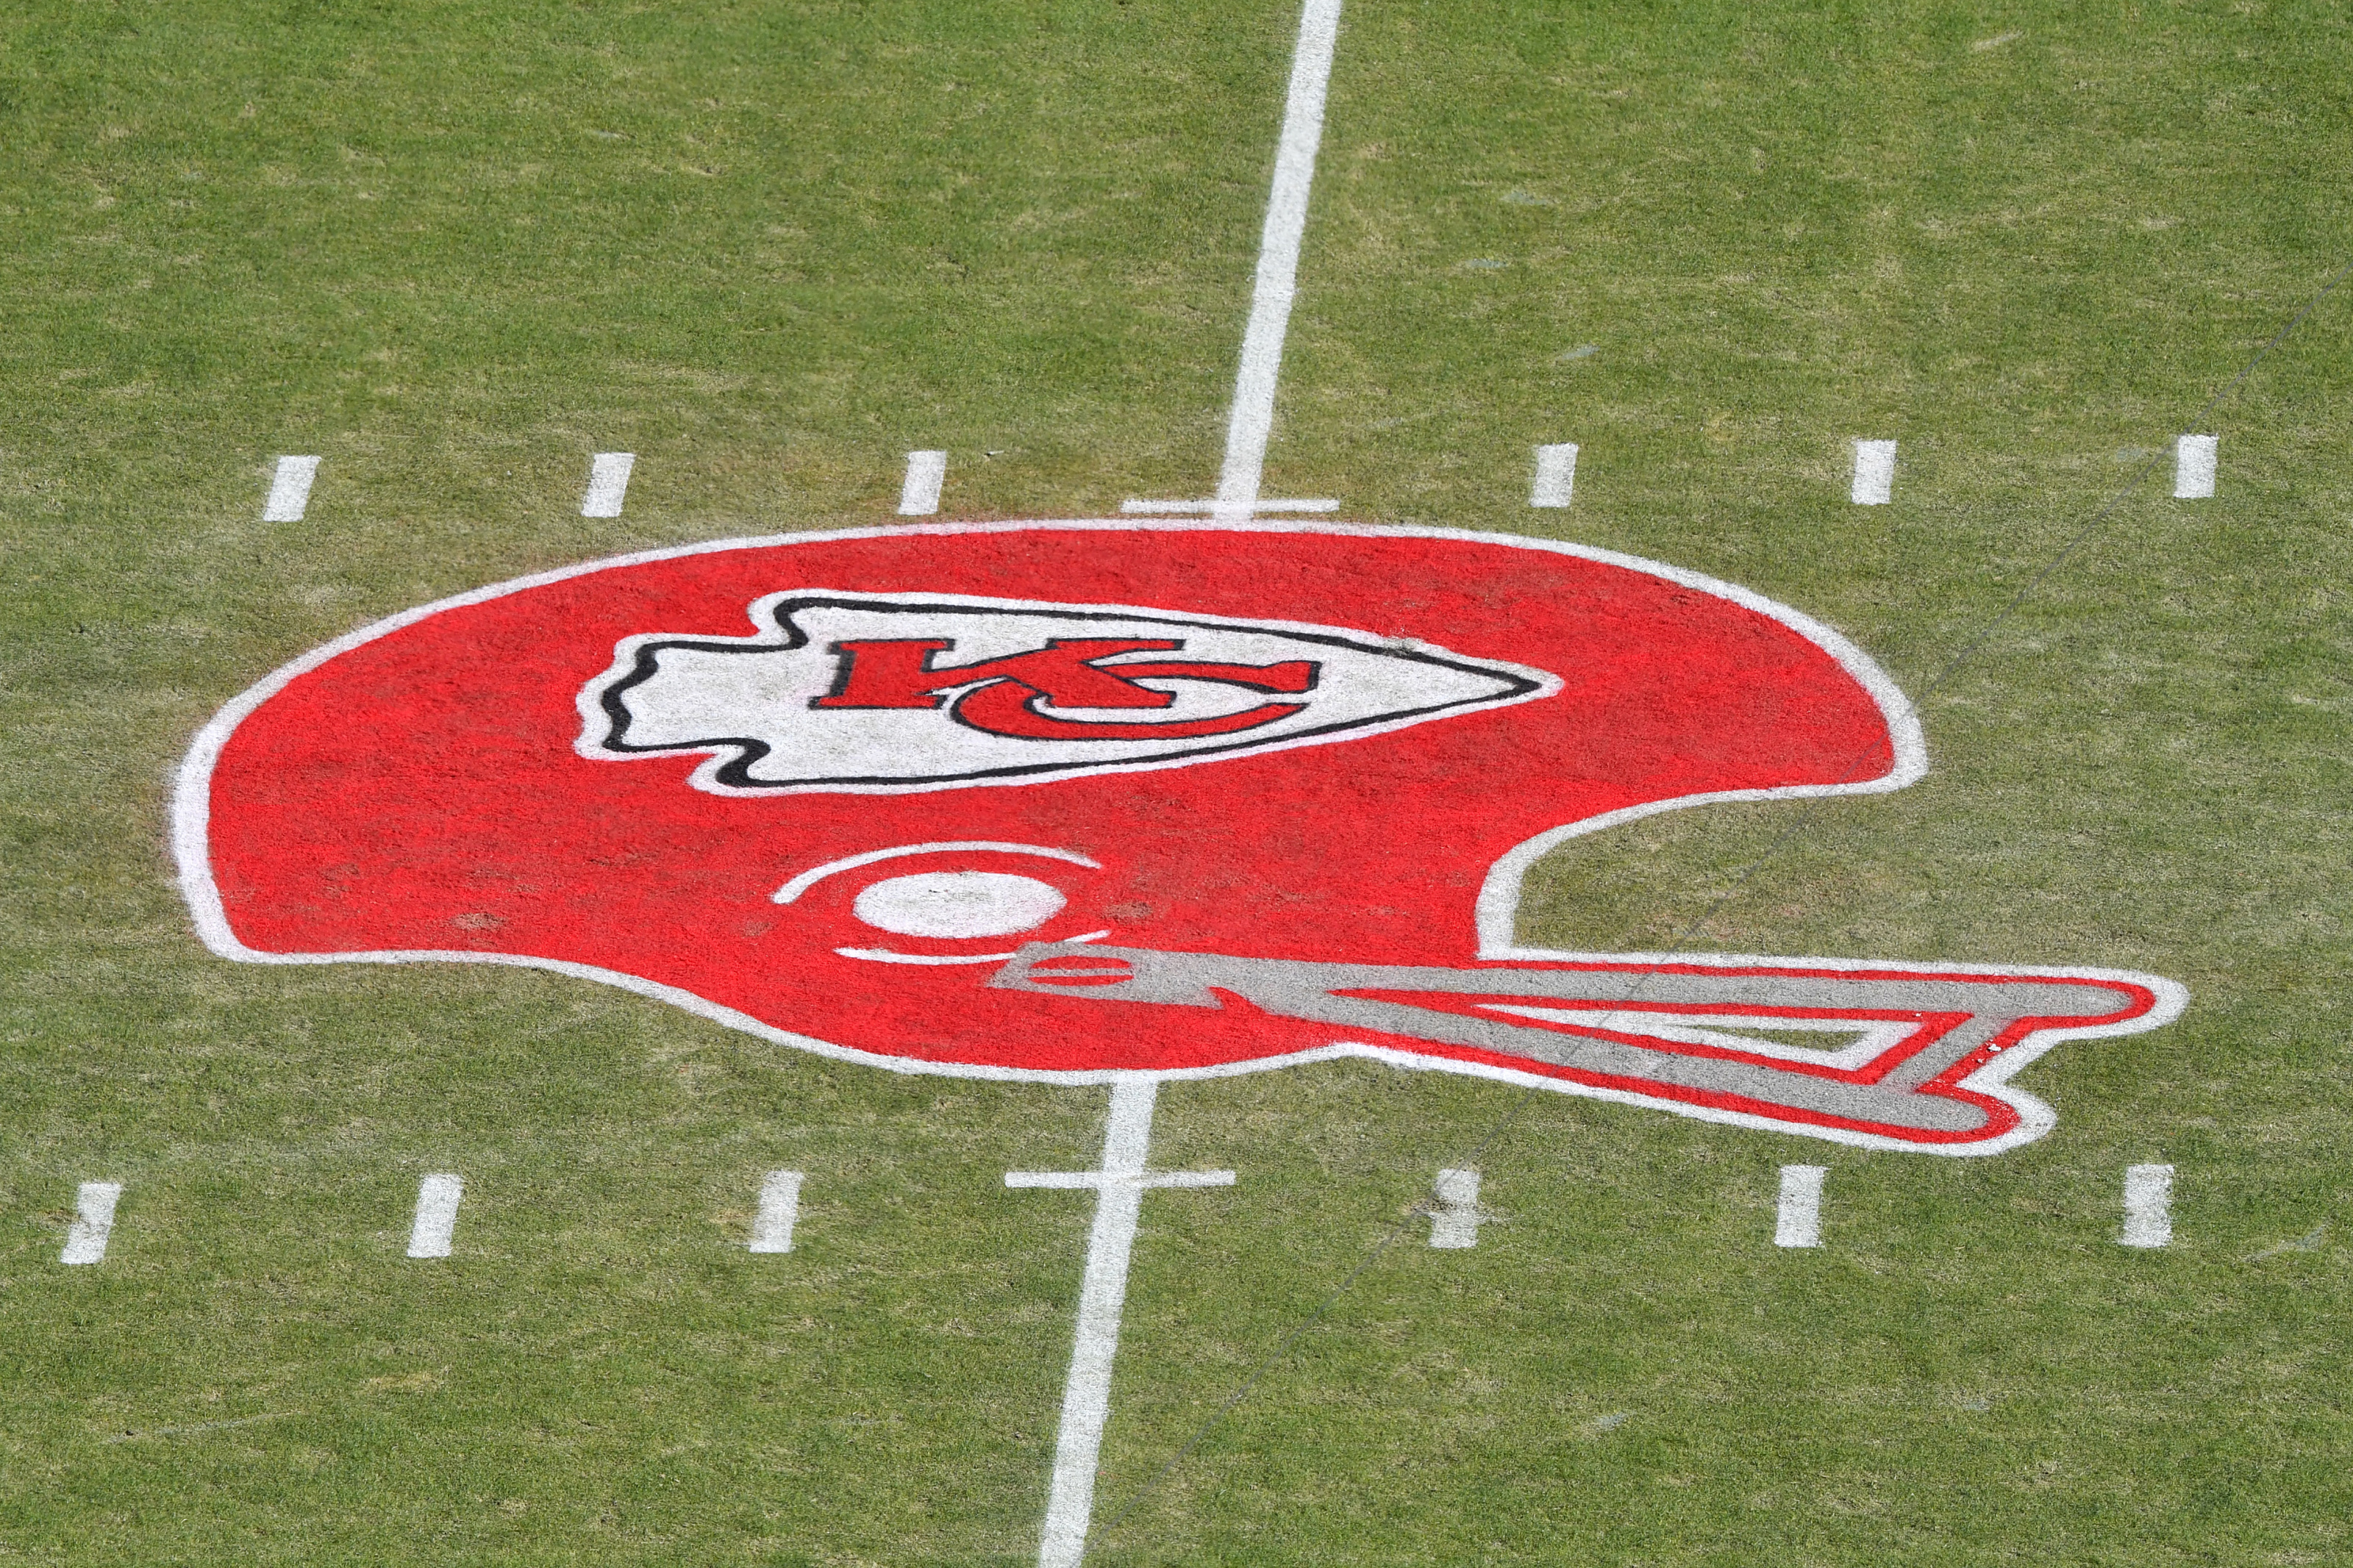 Oklahoma football fans have several reasons to side with K.C. Chiefs